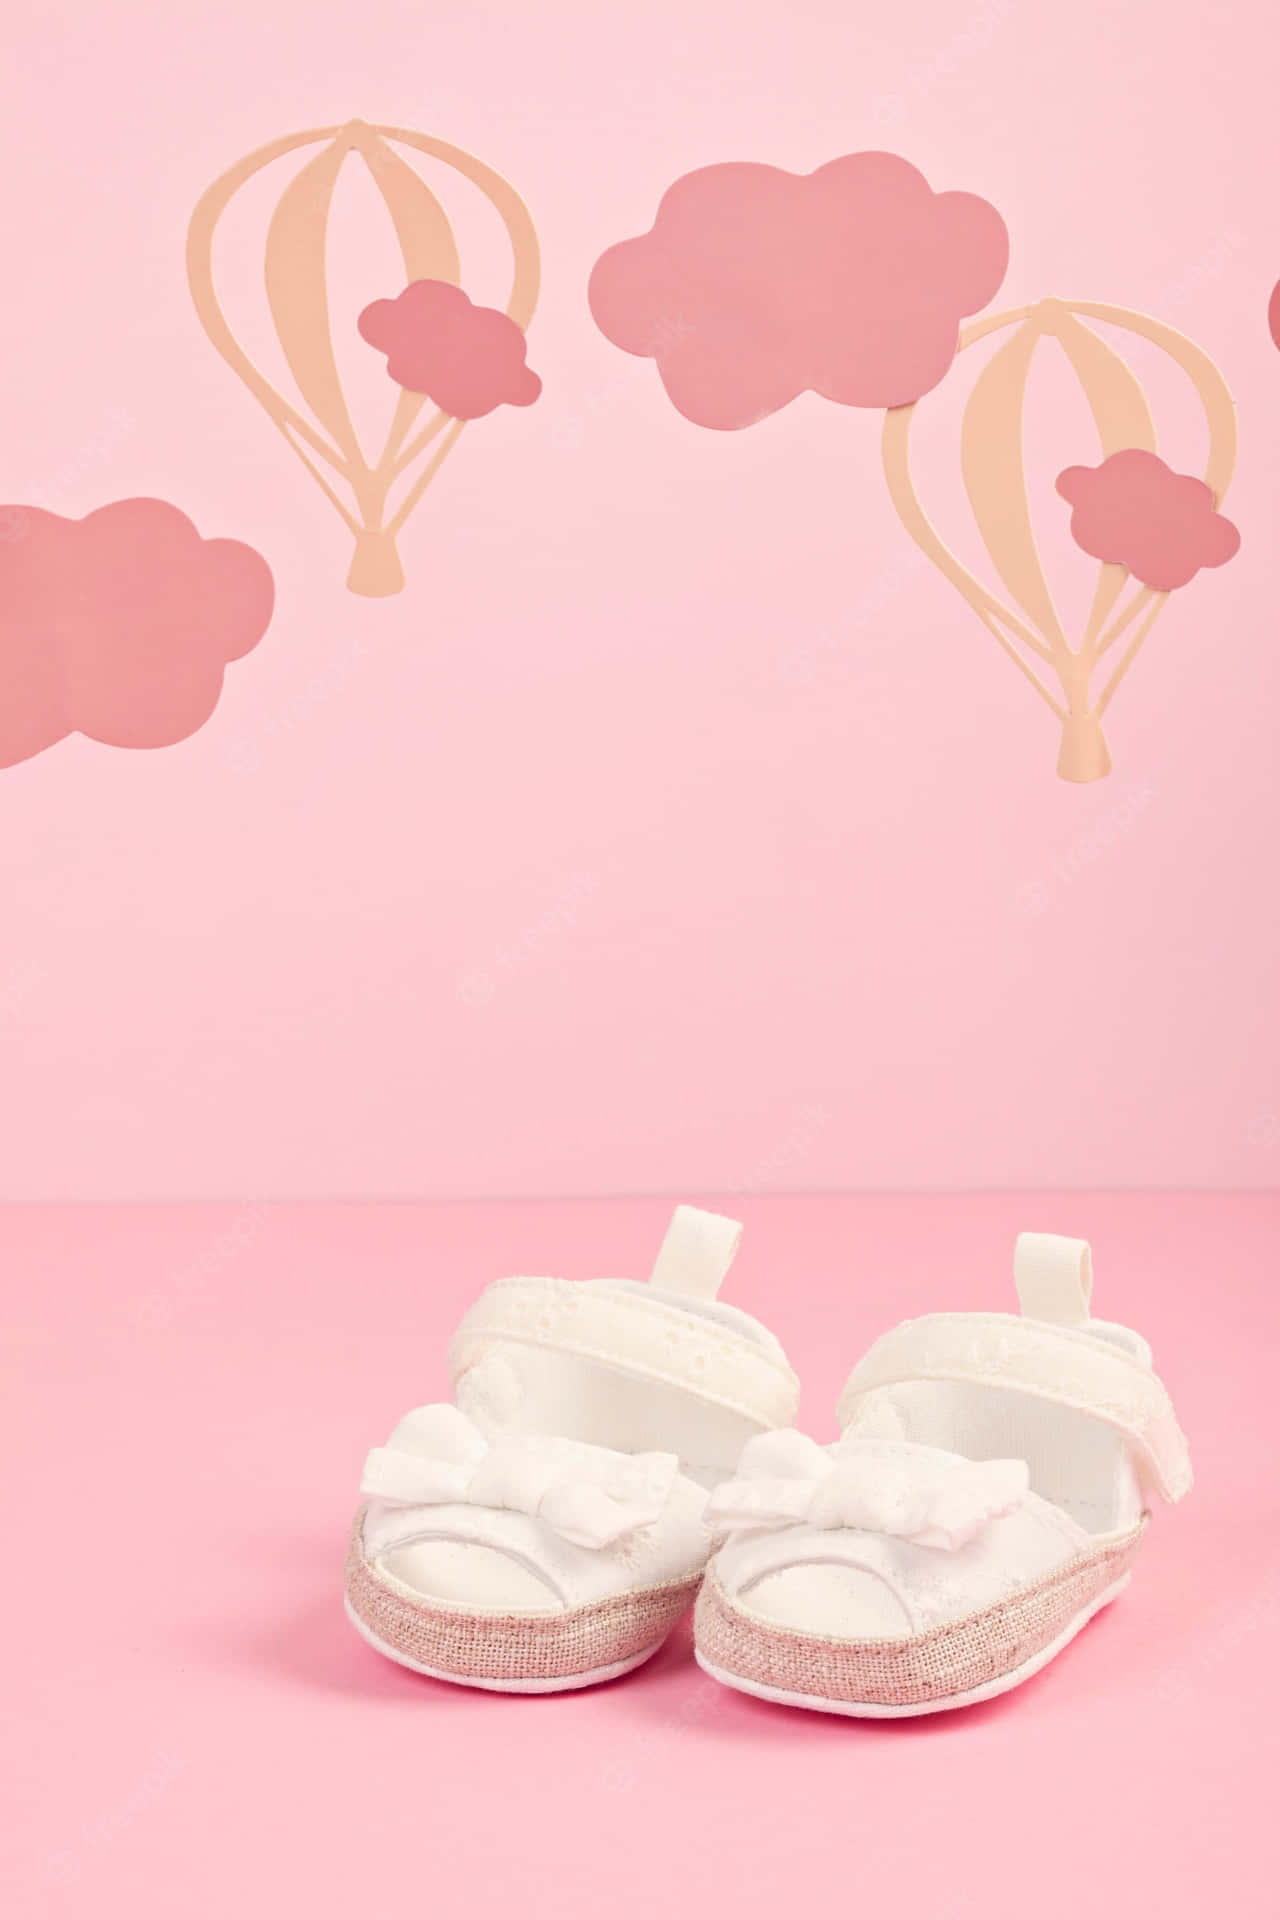 Baby Shoes With Hot Air Balloons On A Pink Background Wallpaper